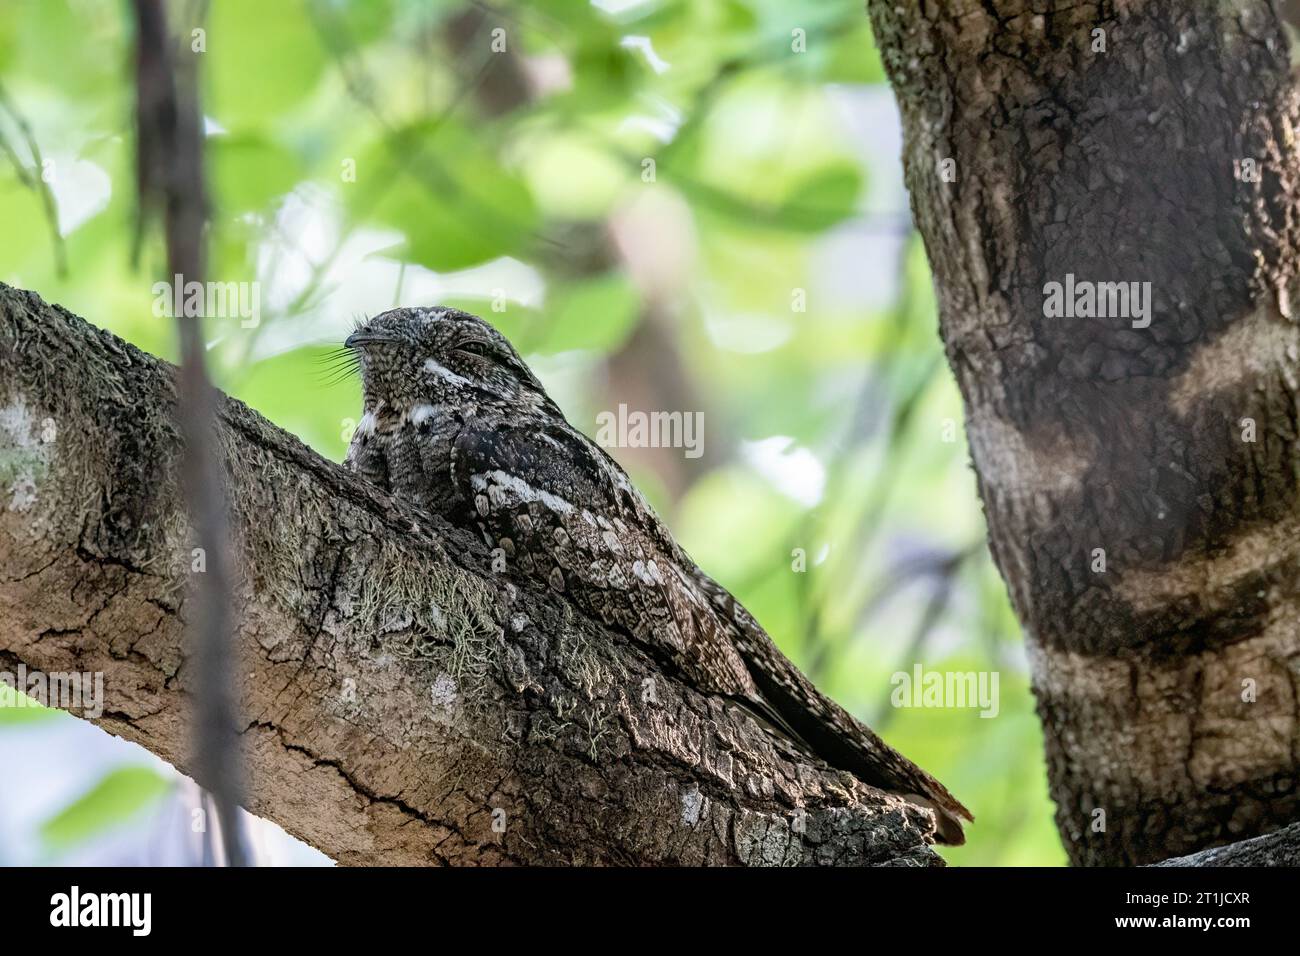 A Jungle nightjar perched on a small branch in the jungles of Pench National Park during a wildlife safari Stock Photo